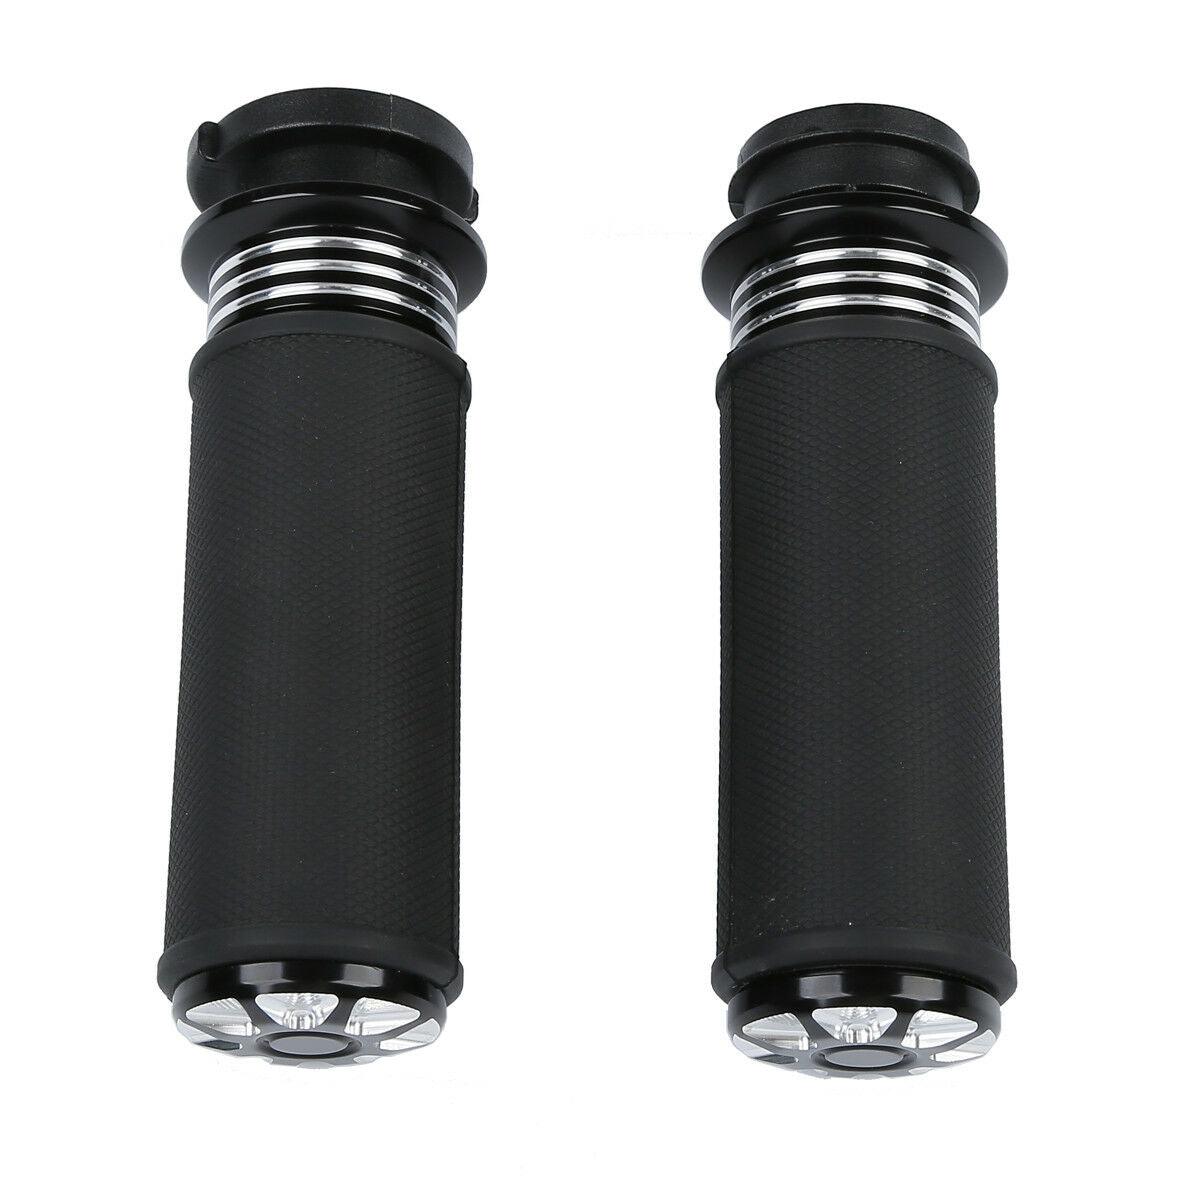 Electric Handle Bar Hand Grips 1" 25mm Fit For Harley Sportster Touring Custom - Moto Life Products